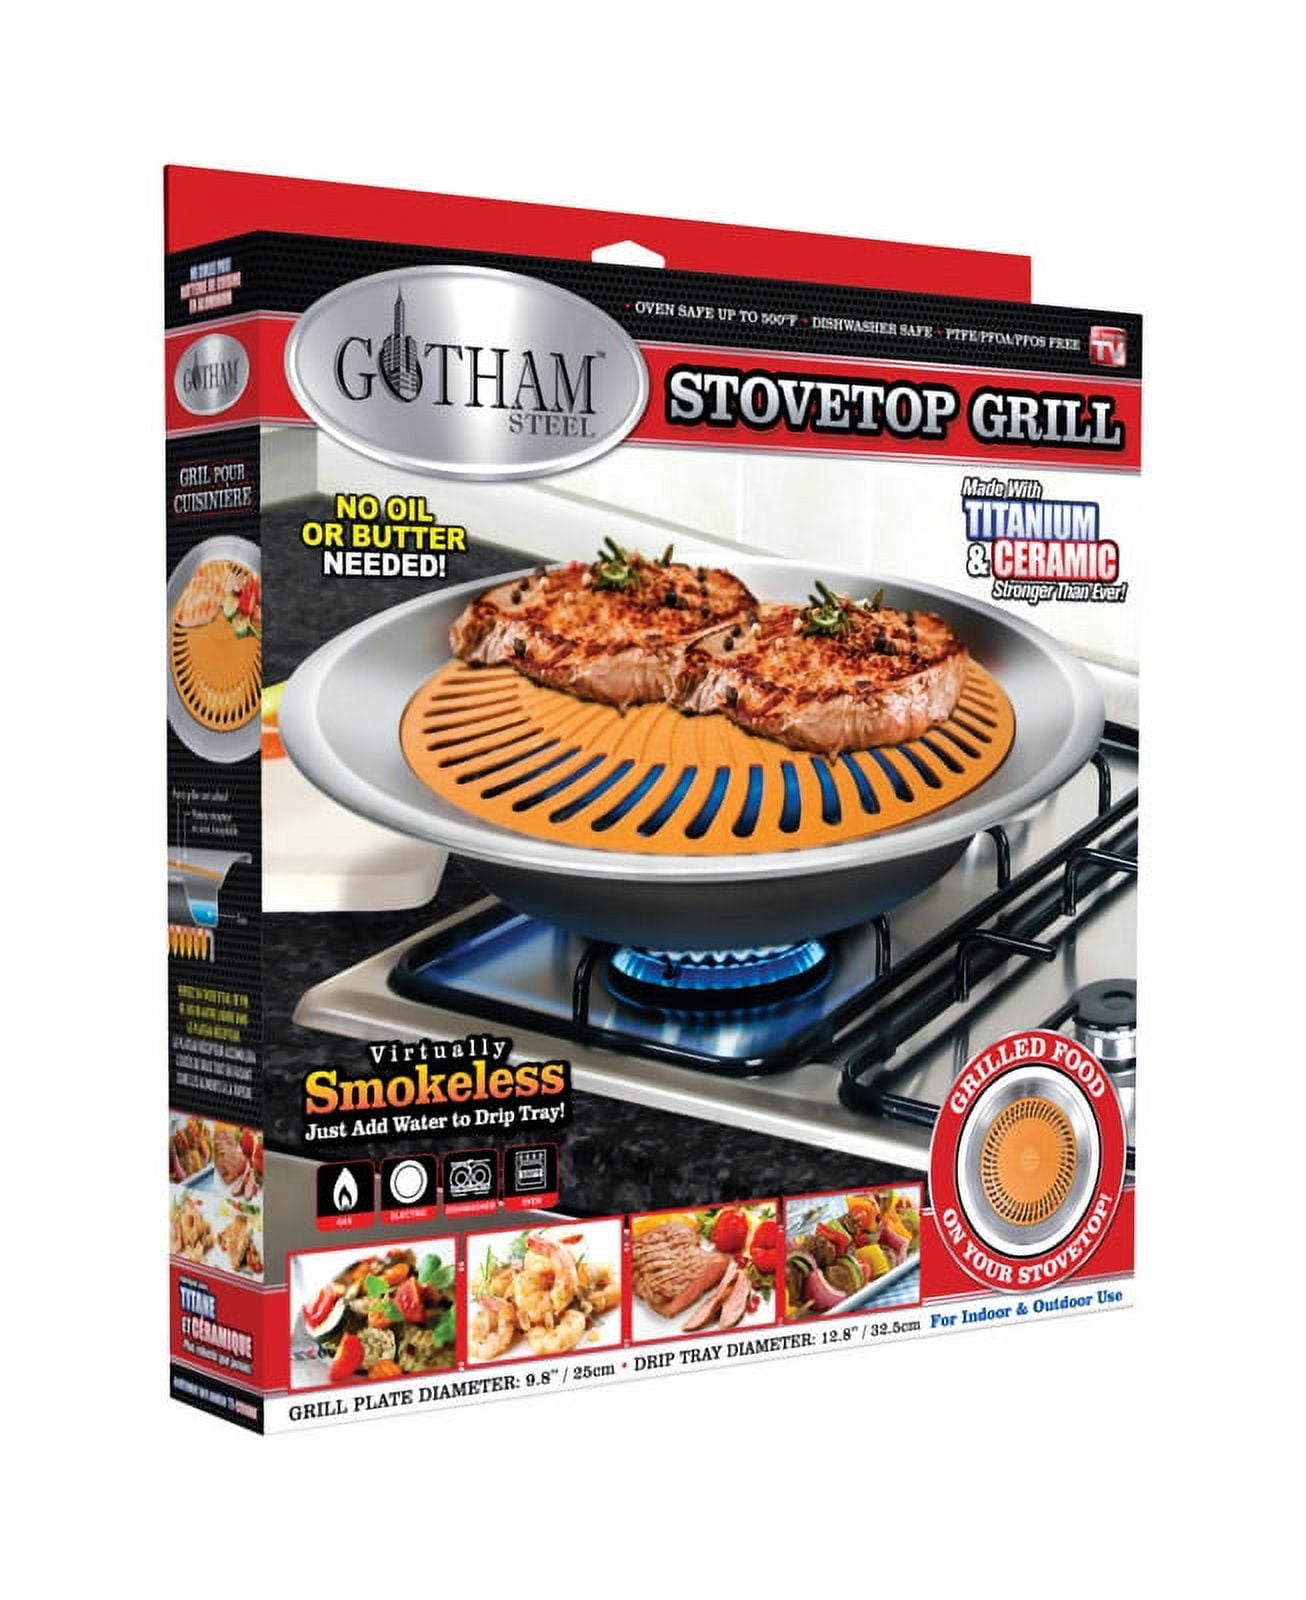 Gotham Steel Smokeless Stovetop Grill, Ultra-Nonstick At Home Korean BBQ  Grill, Dishwasher Safe BBQ Grill & KBBQ Grill Indoor with Drip Tray for